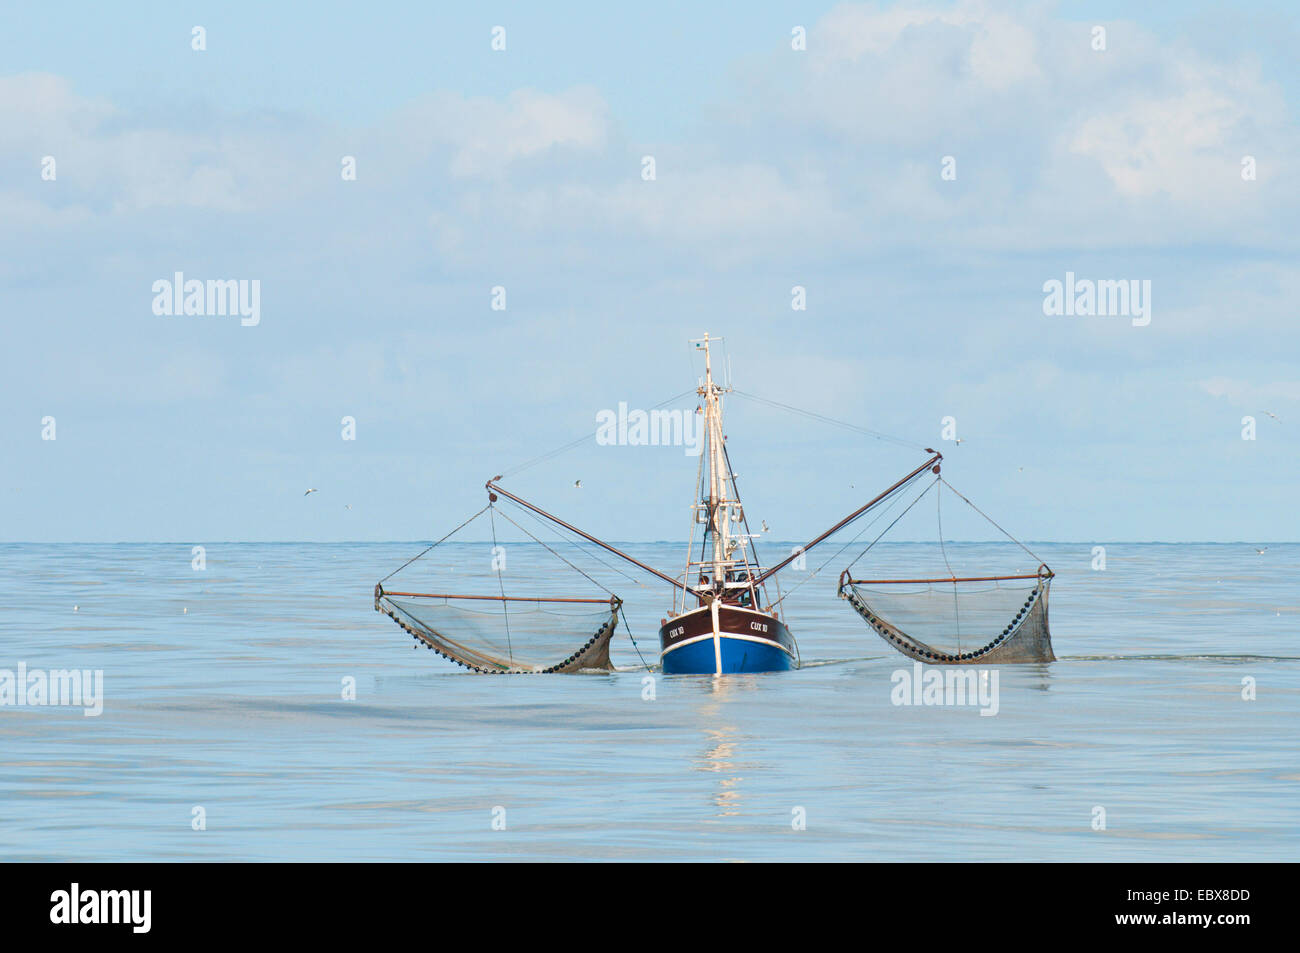 shrimp cutter fishing in the North Sea, Germany, Schleswig-Holstein Stock Photo